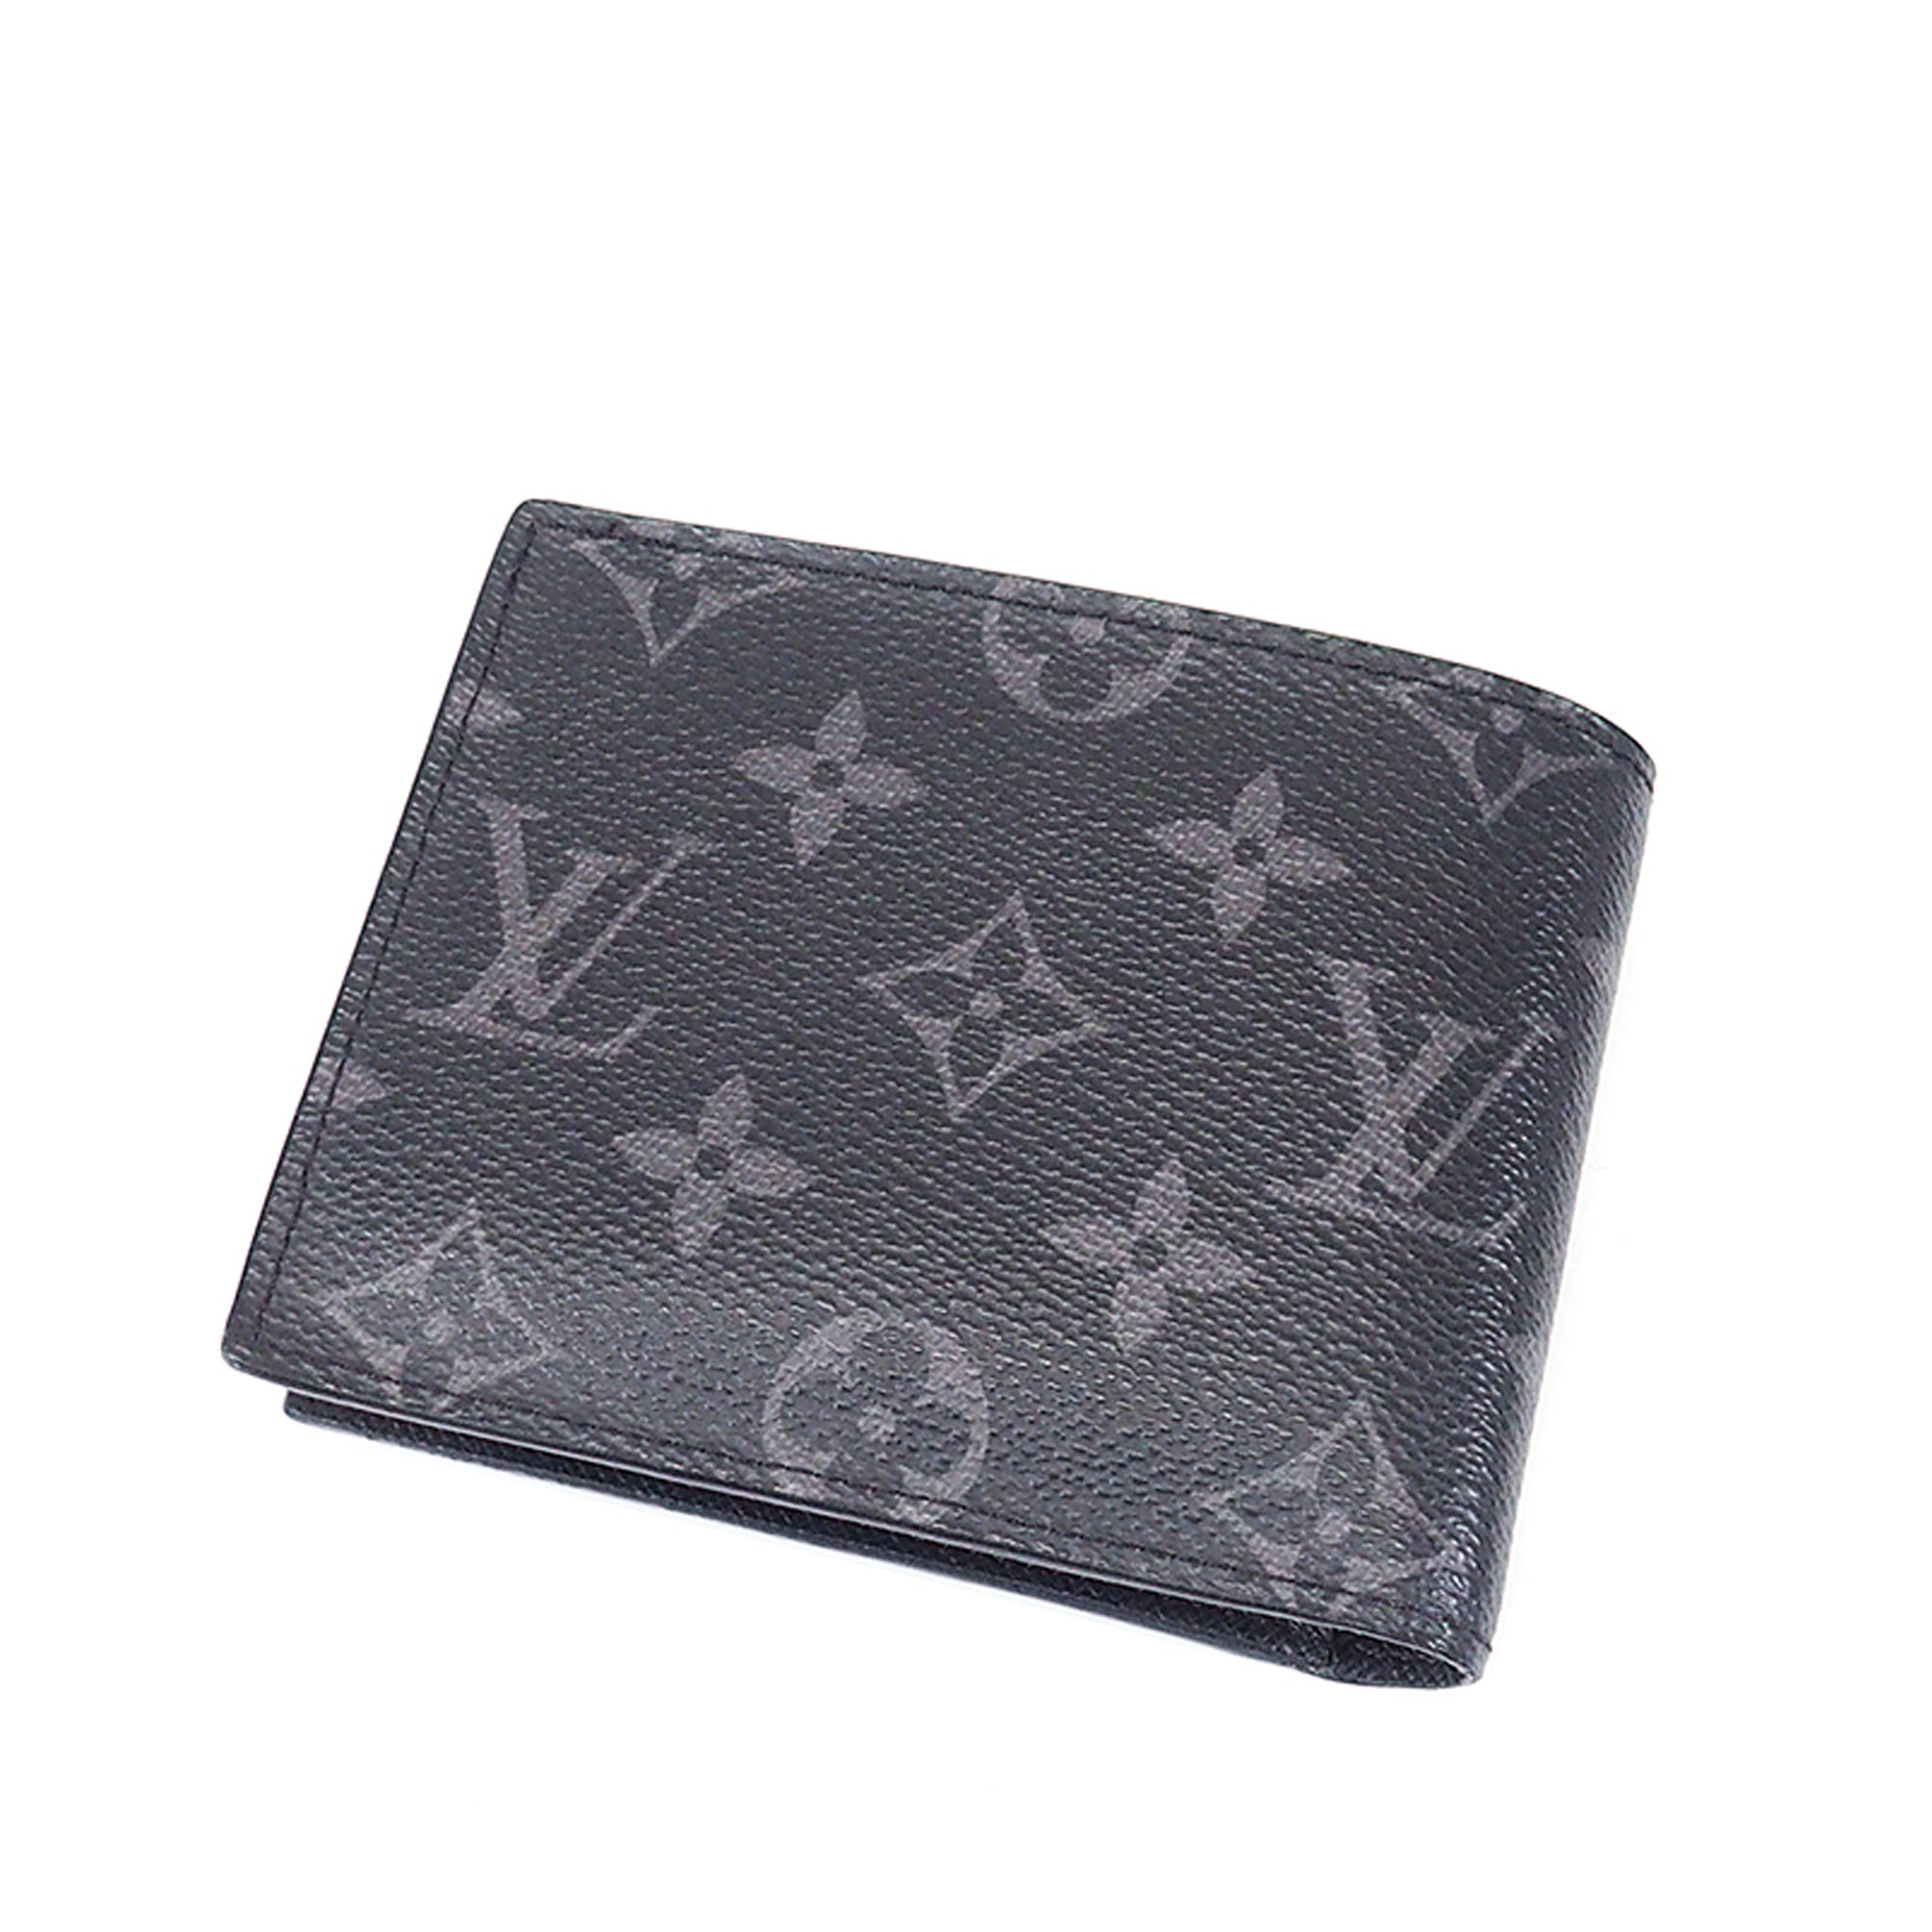 Slender Wallet Taurillon Monogram  Wallets and Small Leather Goods  LOUIS  VUITTON